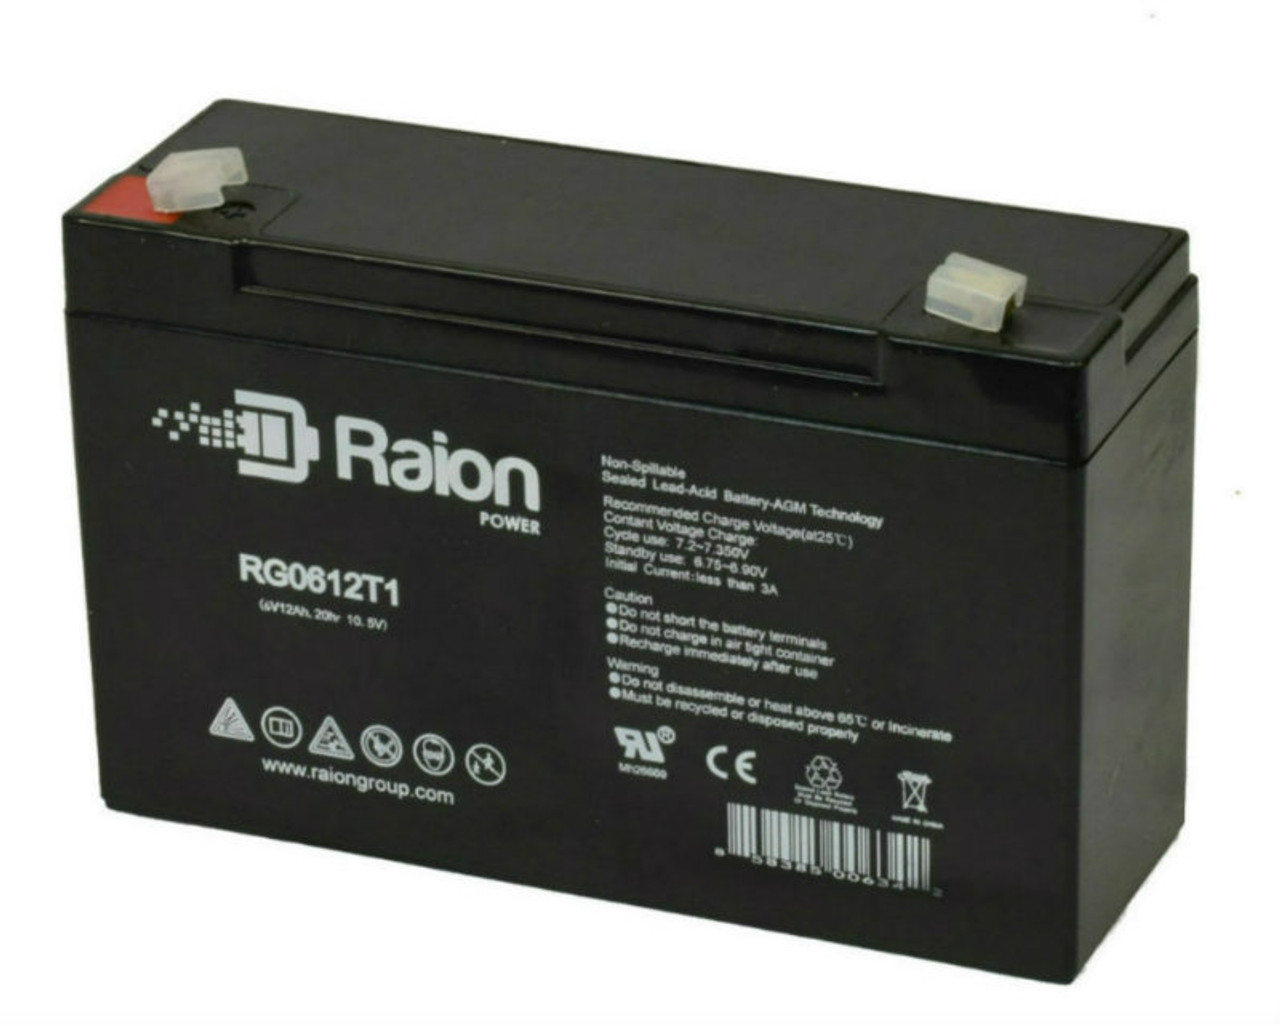 Raion Power RG06120T1 Replacement 6V 12Ah Emergency Light Battery for Mule 12GC050M